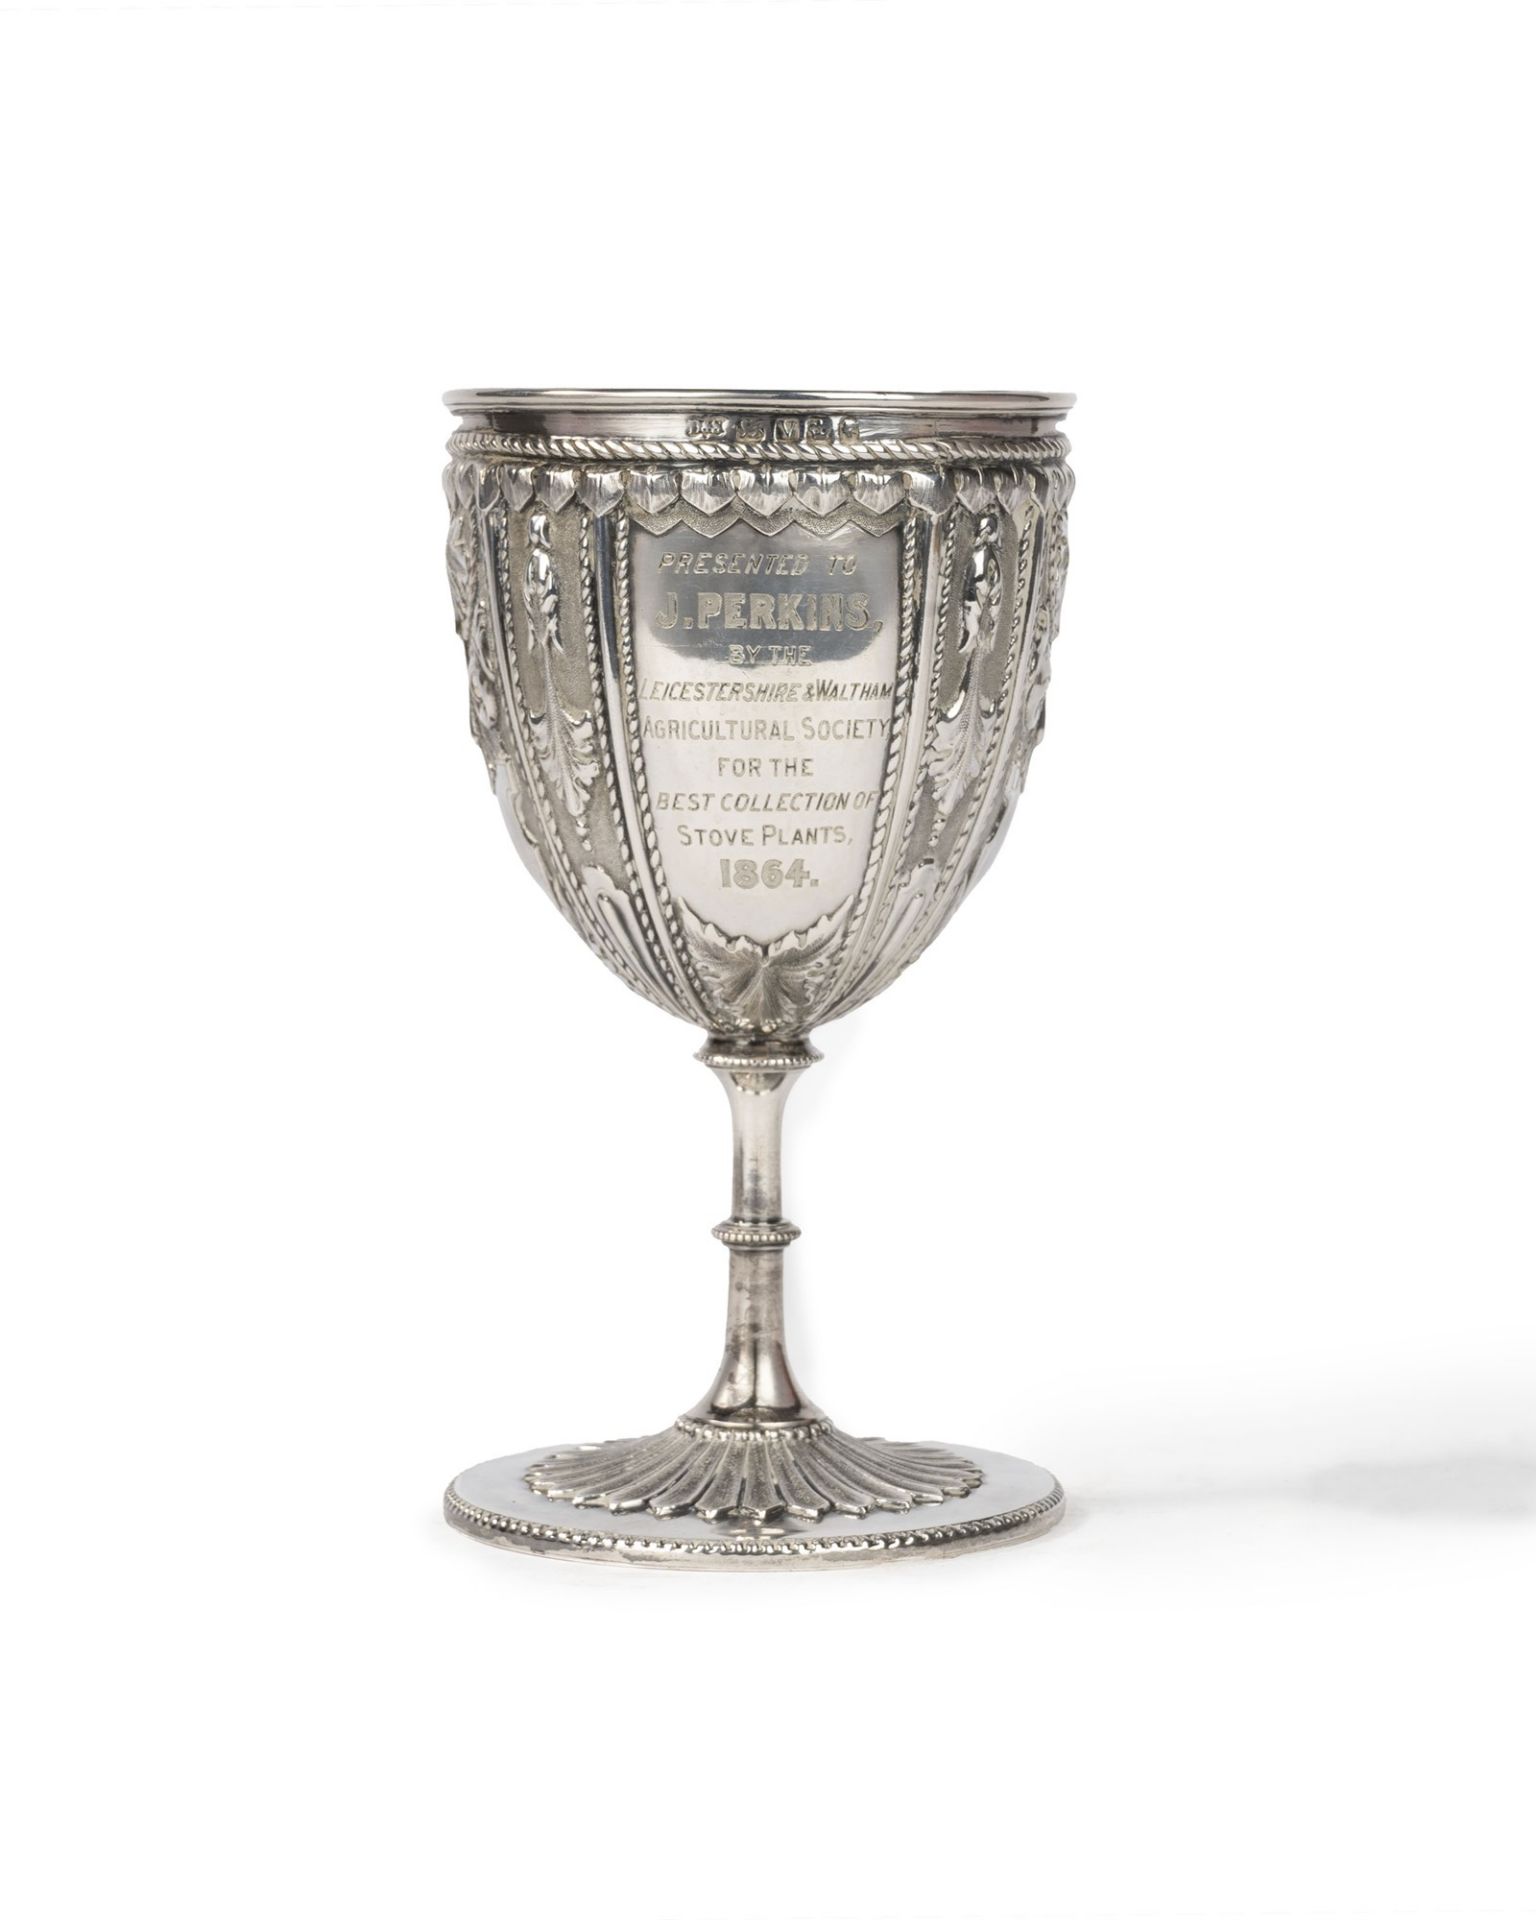 Silver cup, England, 19th century